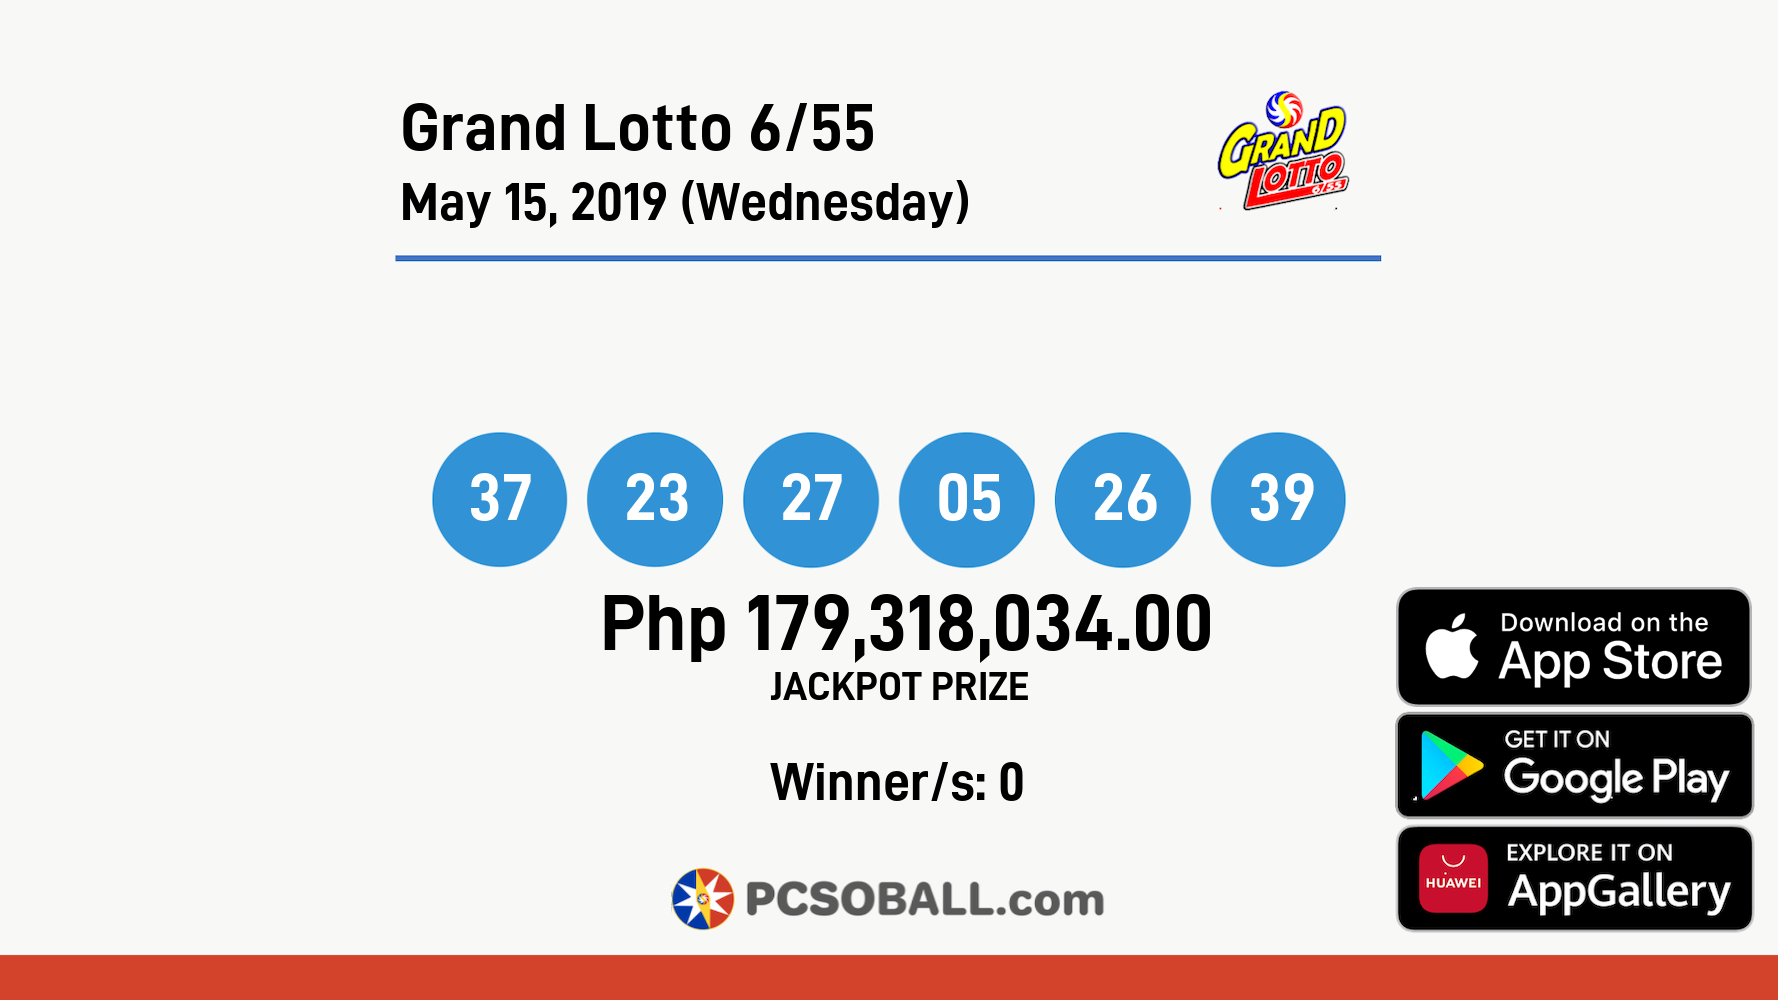 Grand Lotto 6/55 May 15, 2019 (Wednesday) Result